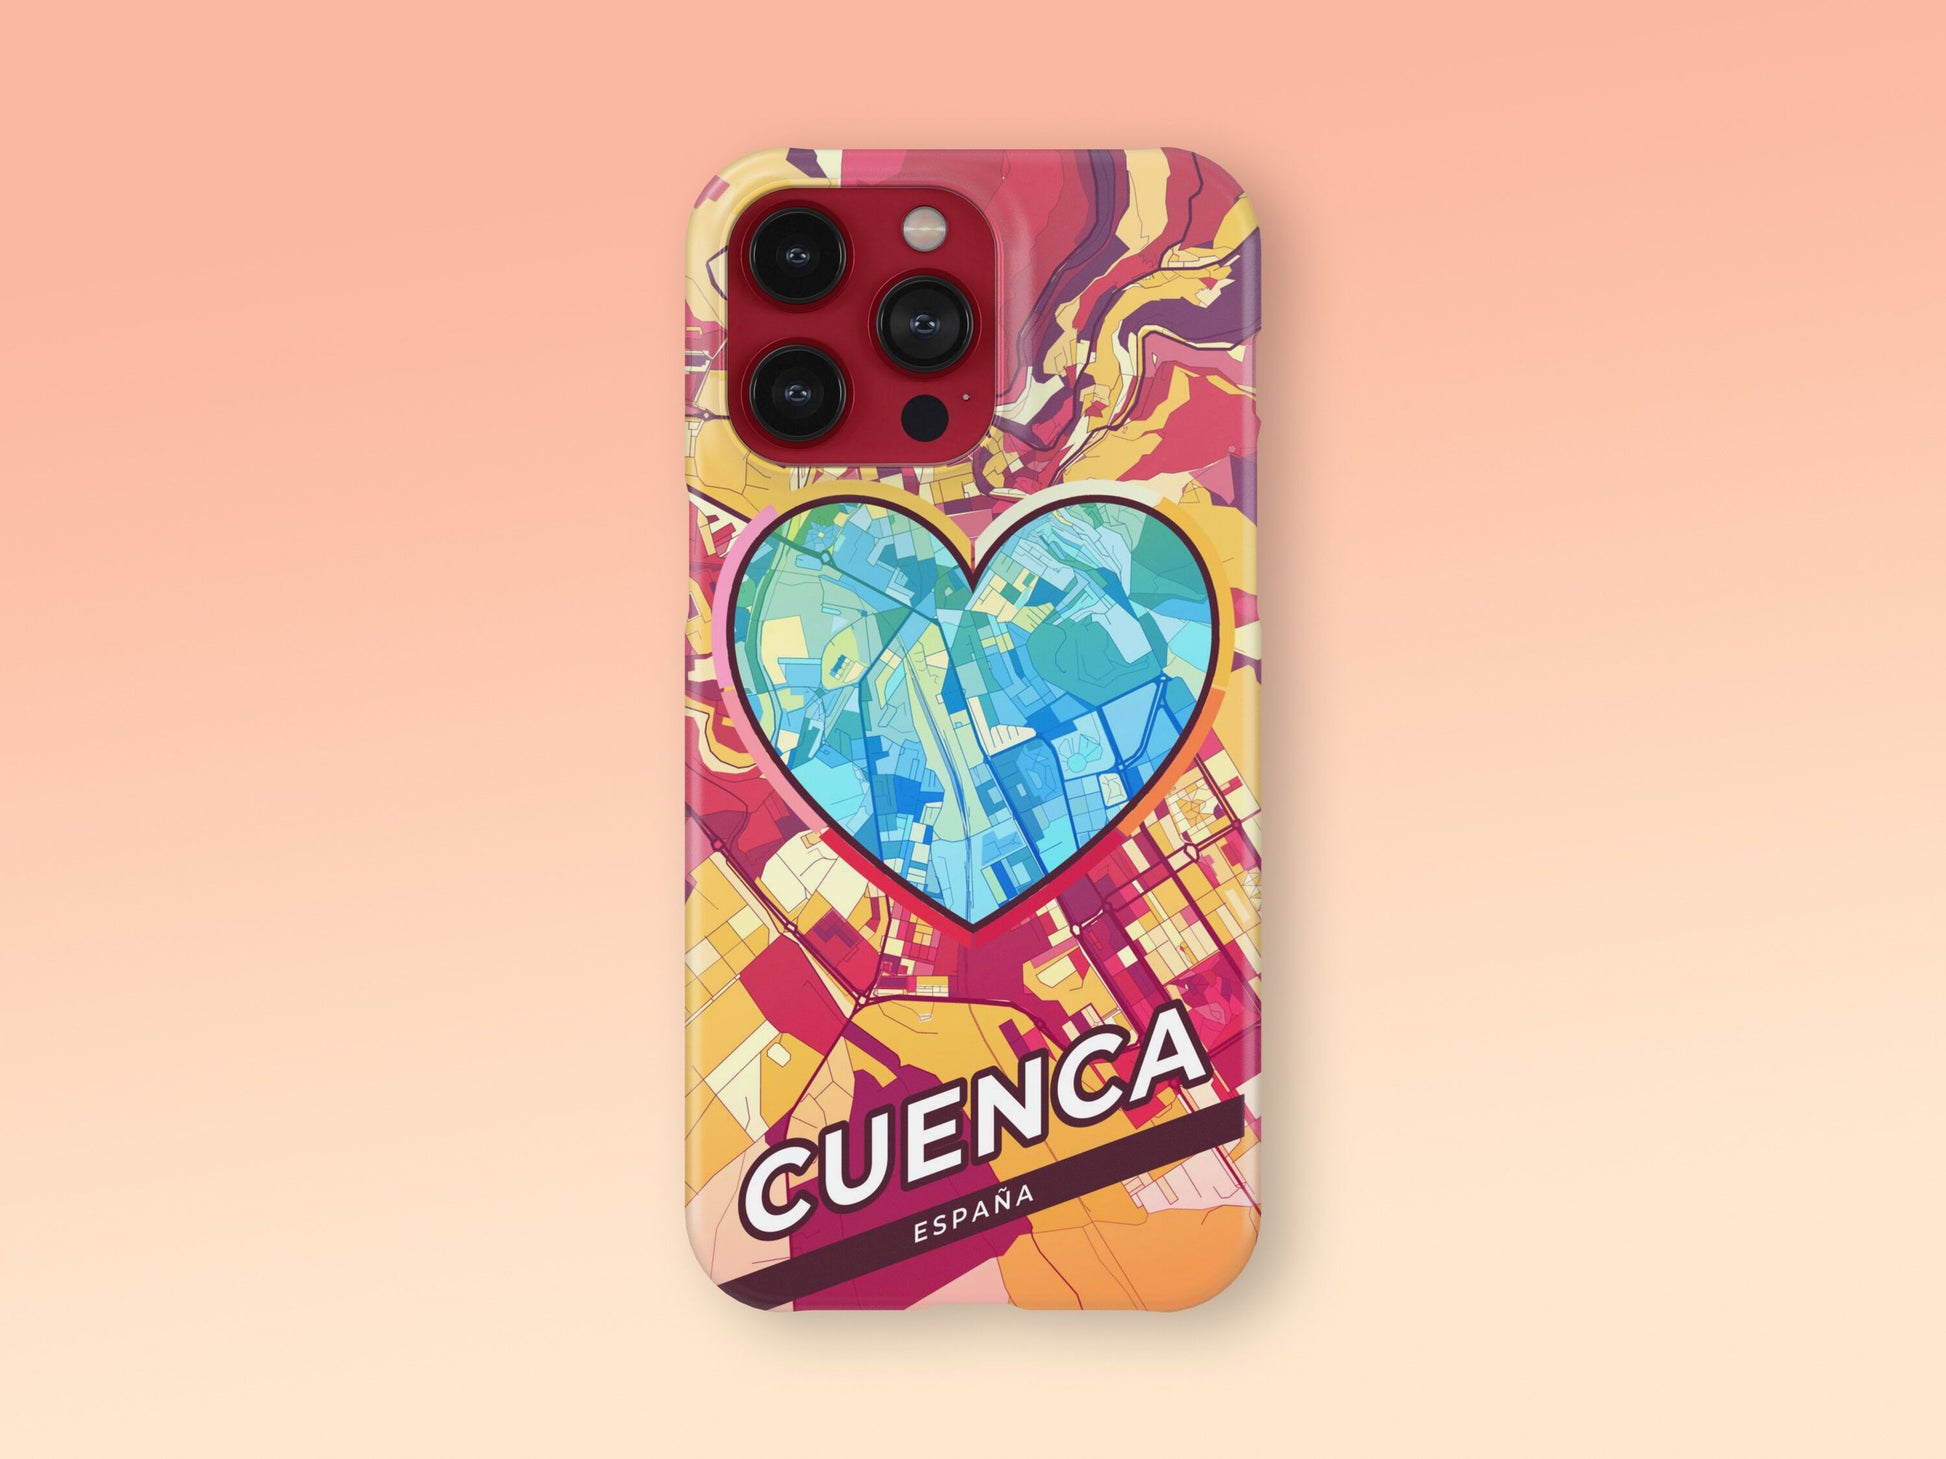 Cuenca Spain slim phone case with colorful icon. Birthday, wedding or housewarming gift. Couple match cases. 2